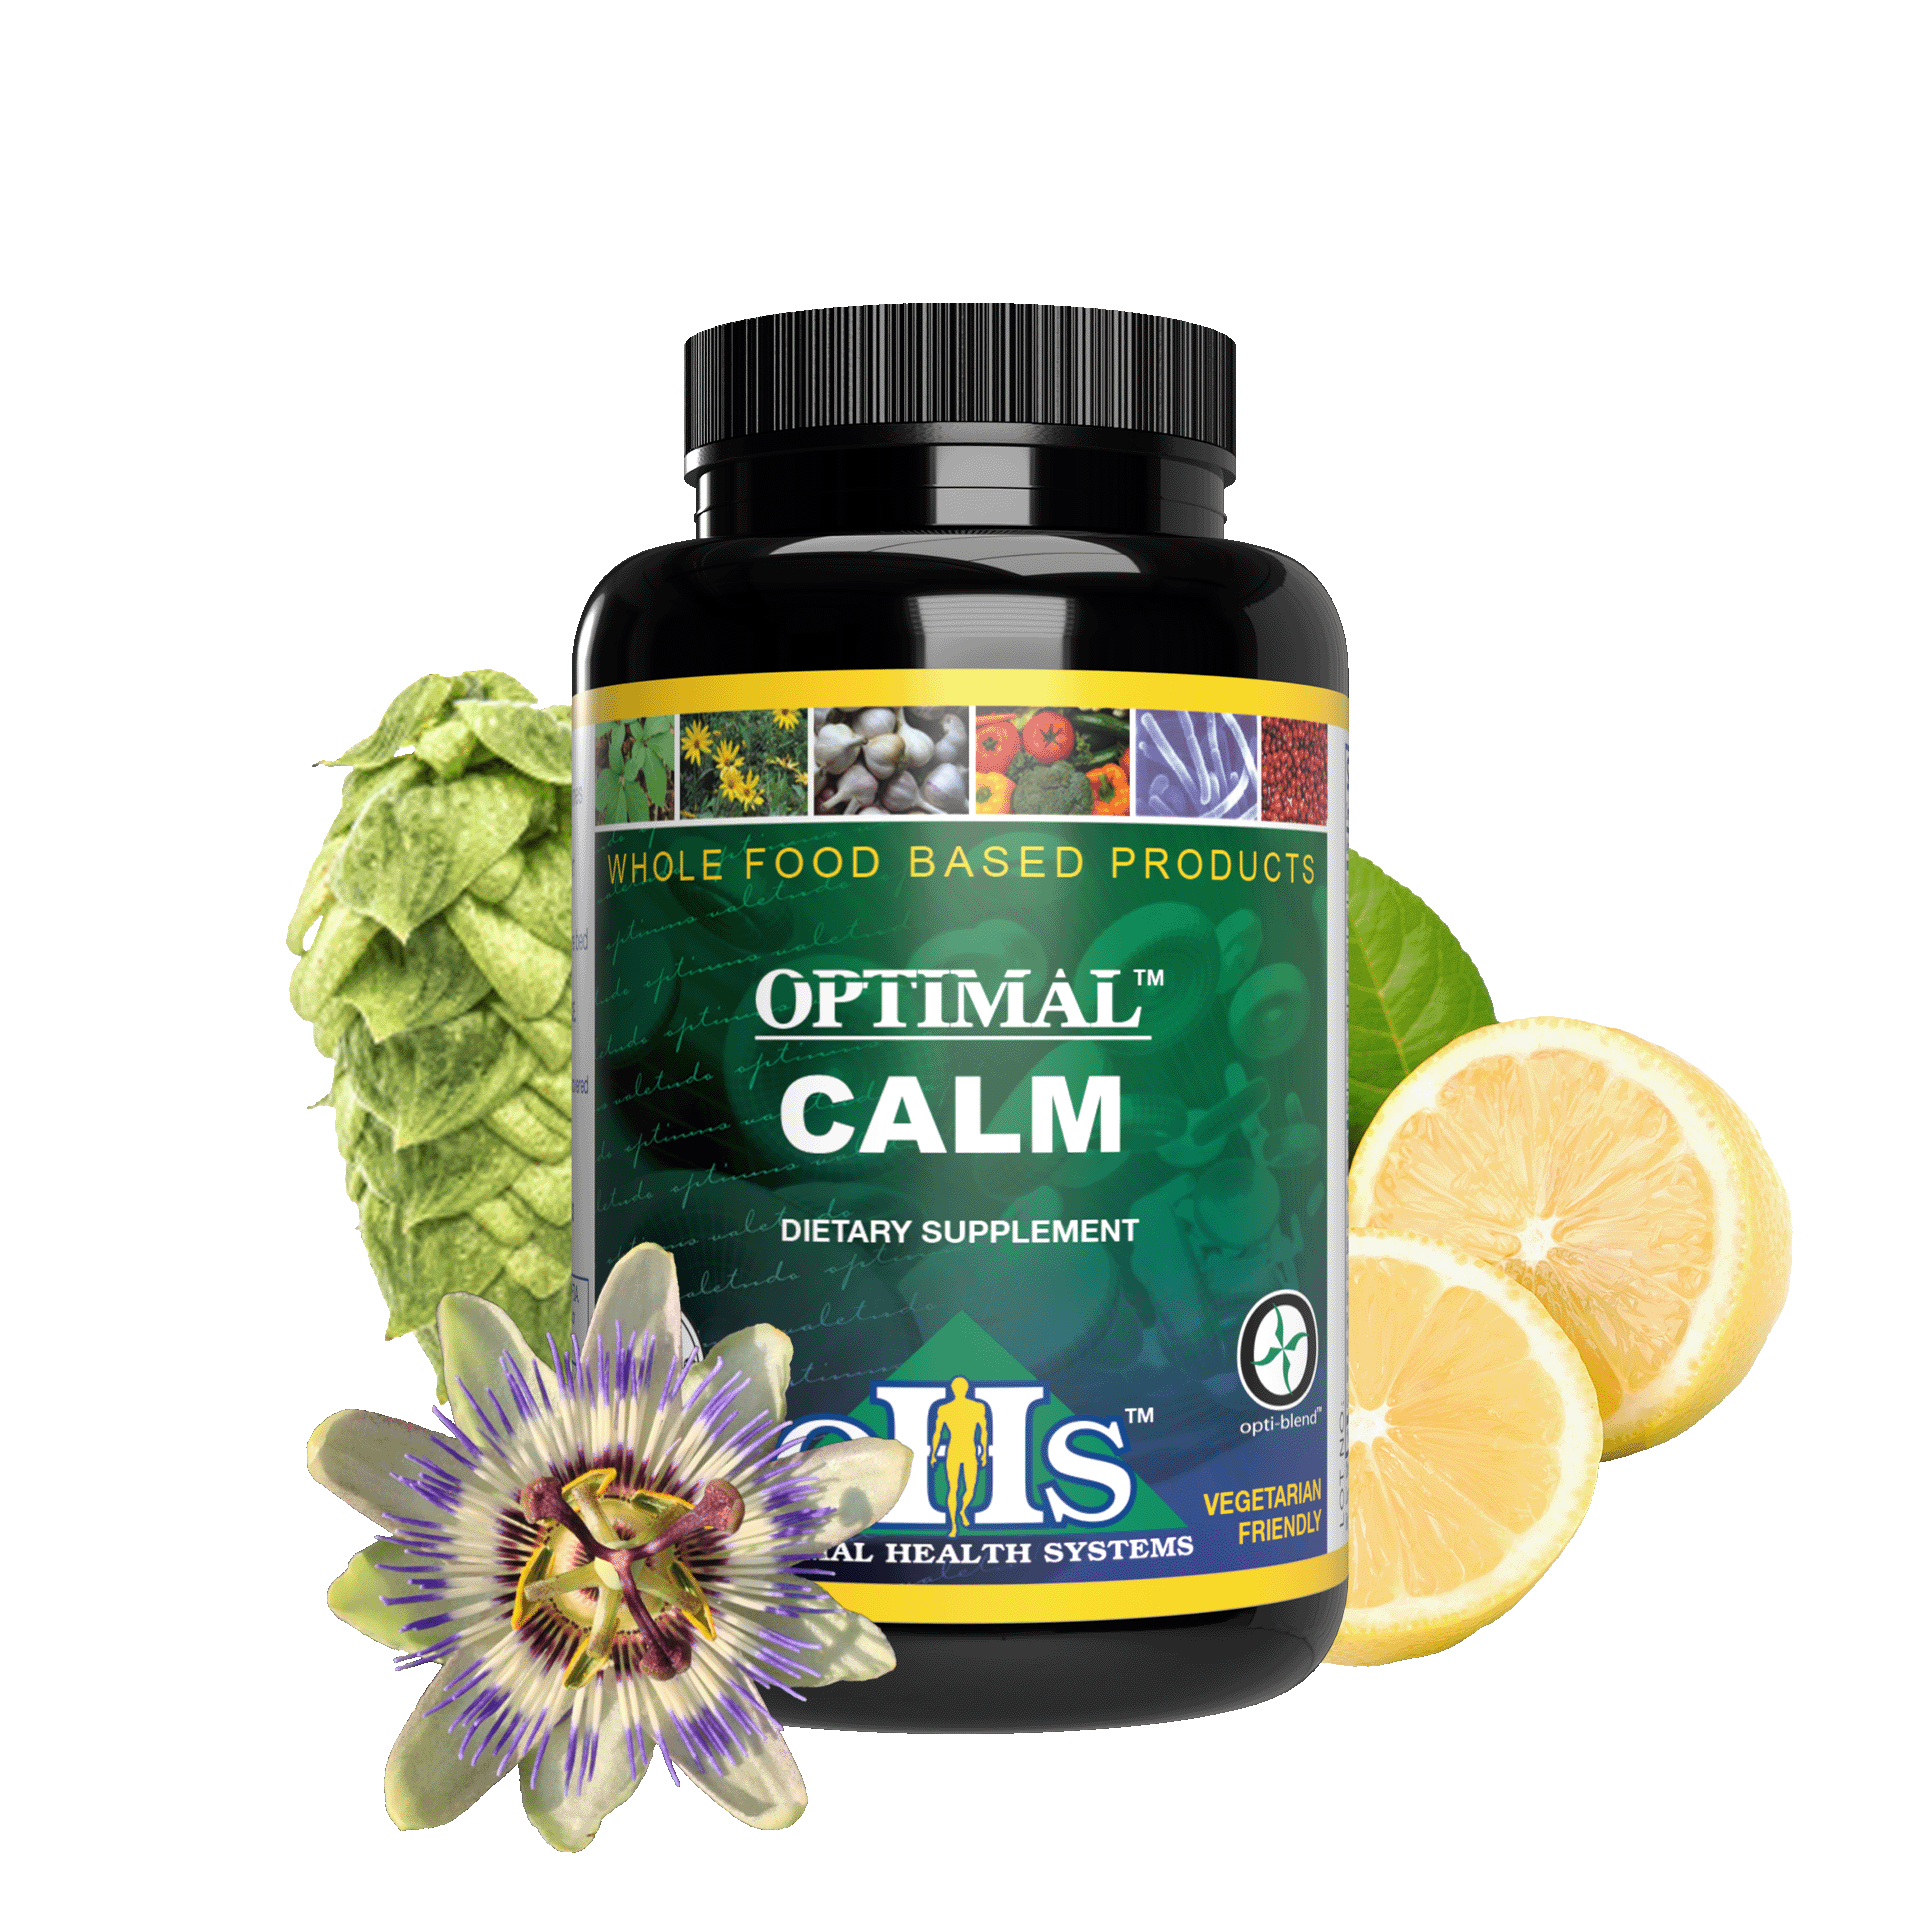 Image of a bottle of Optimal Calm with hops, sliced lemons, and passiflora flower.